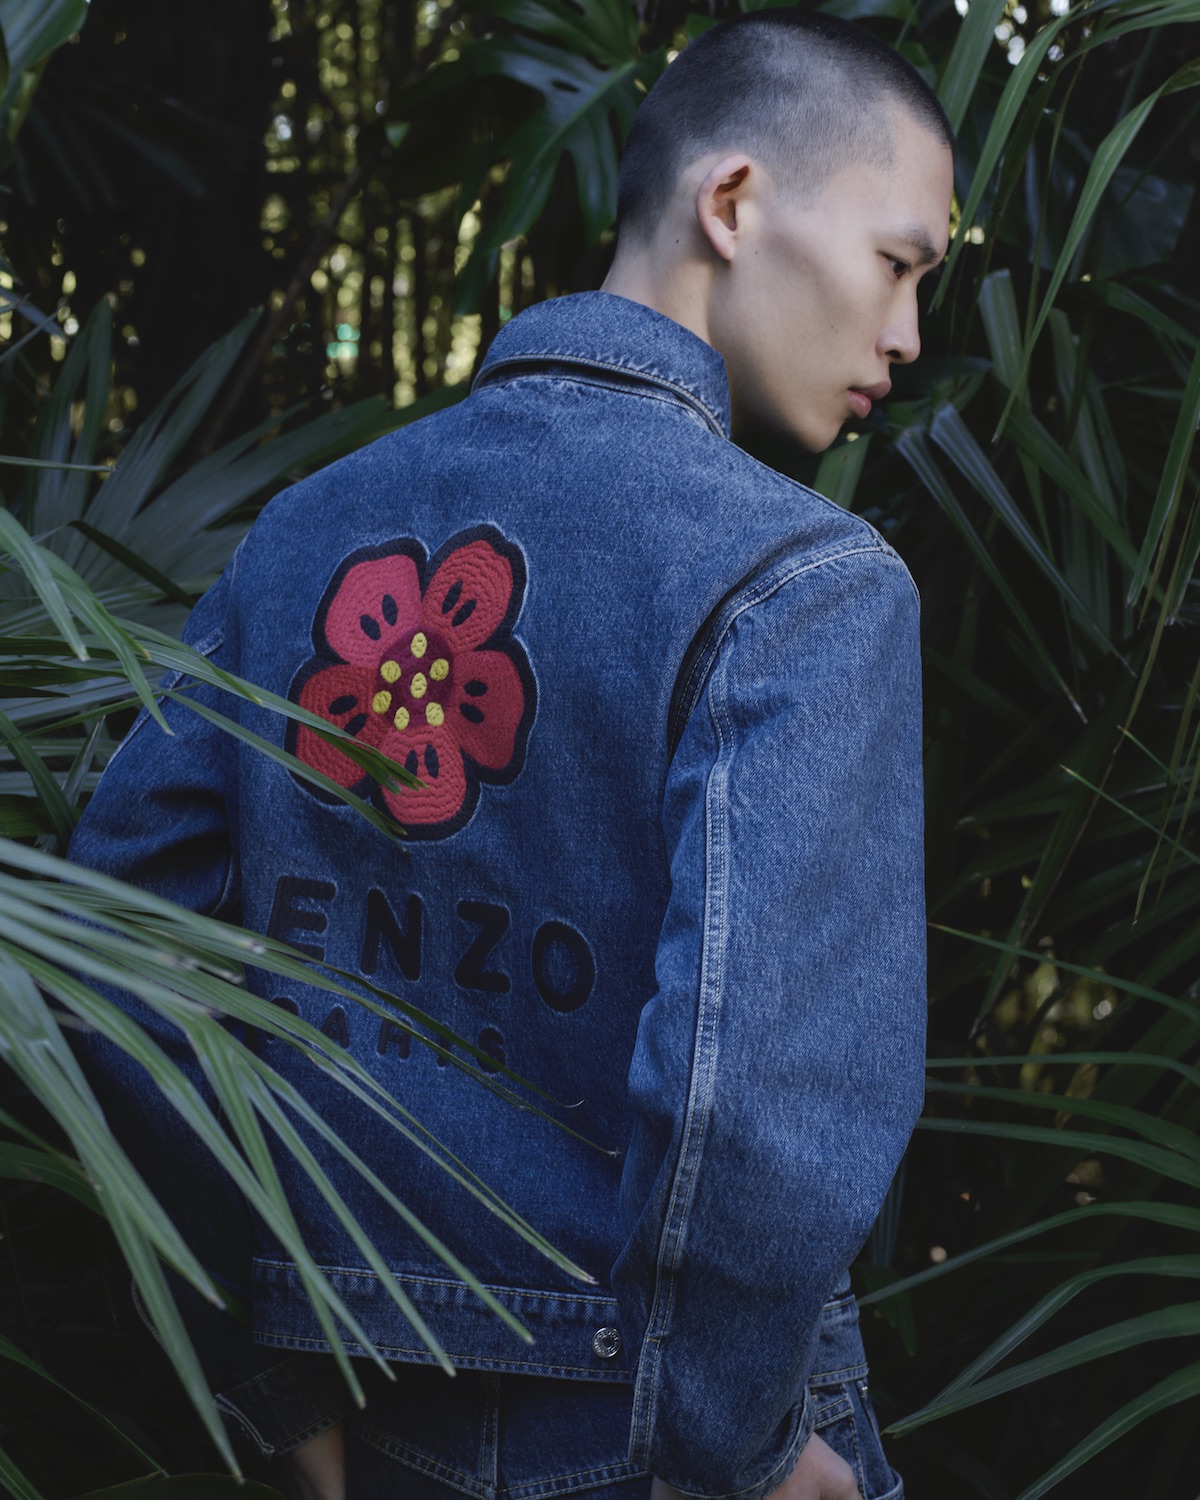 NIGO's First Limited-Edition Capsule With KENZO Arrives on